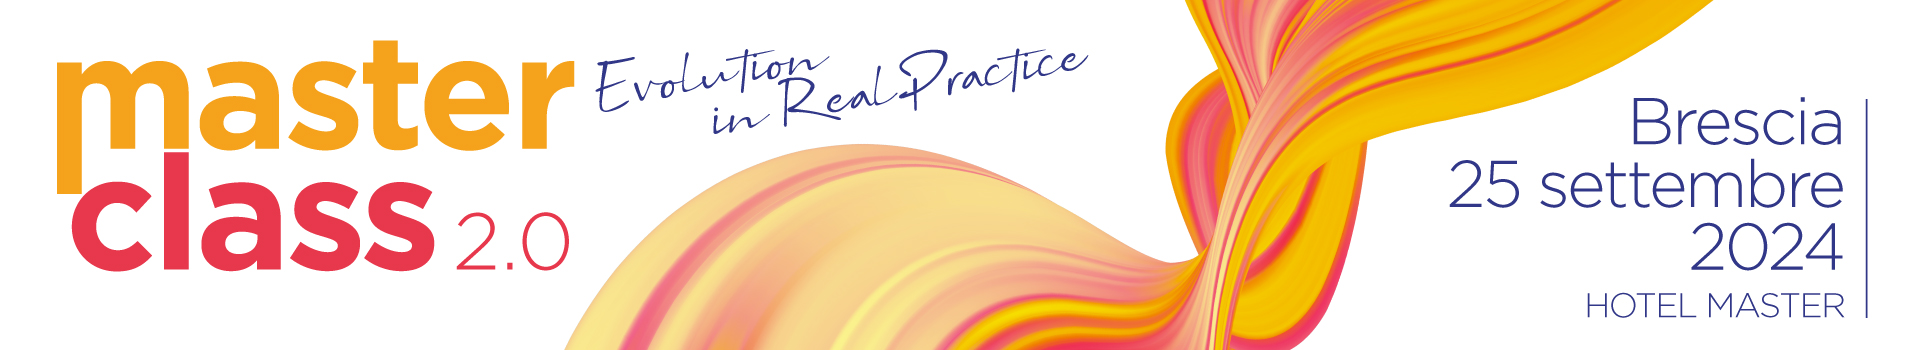 MasterClass 2.0: evolution in Real Practice